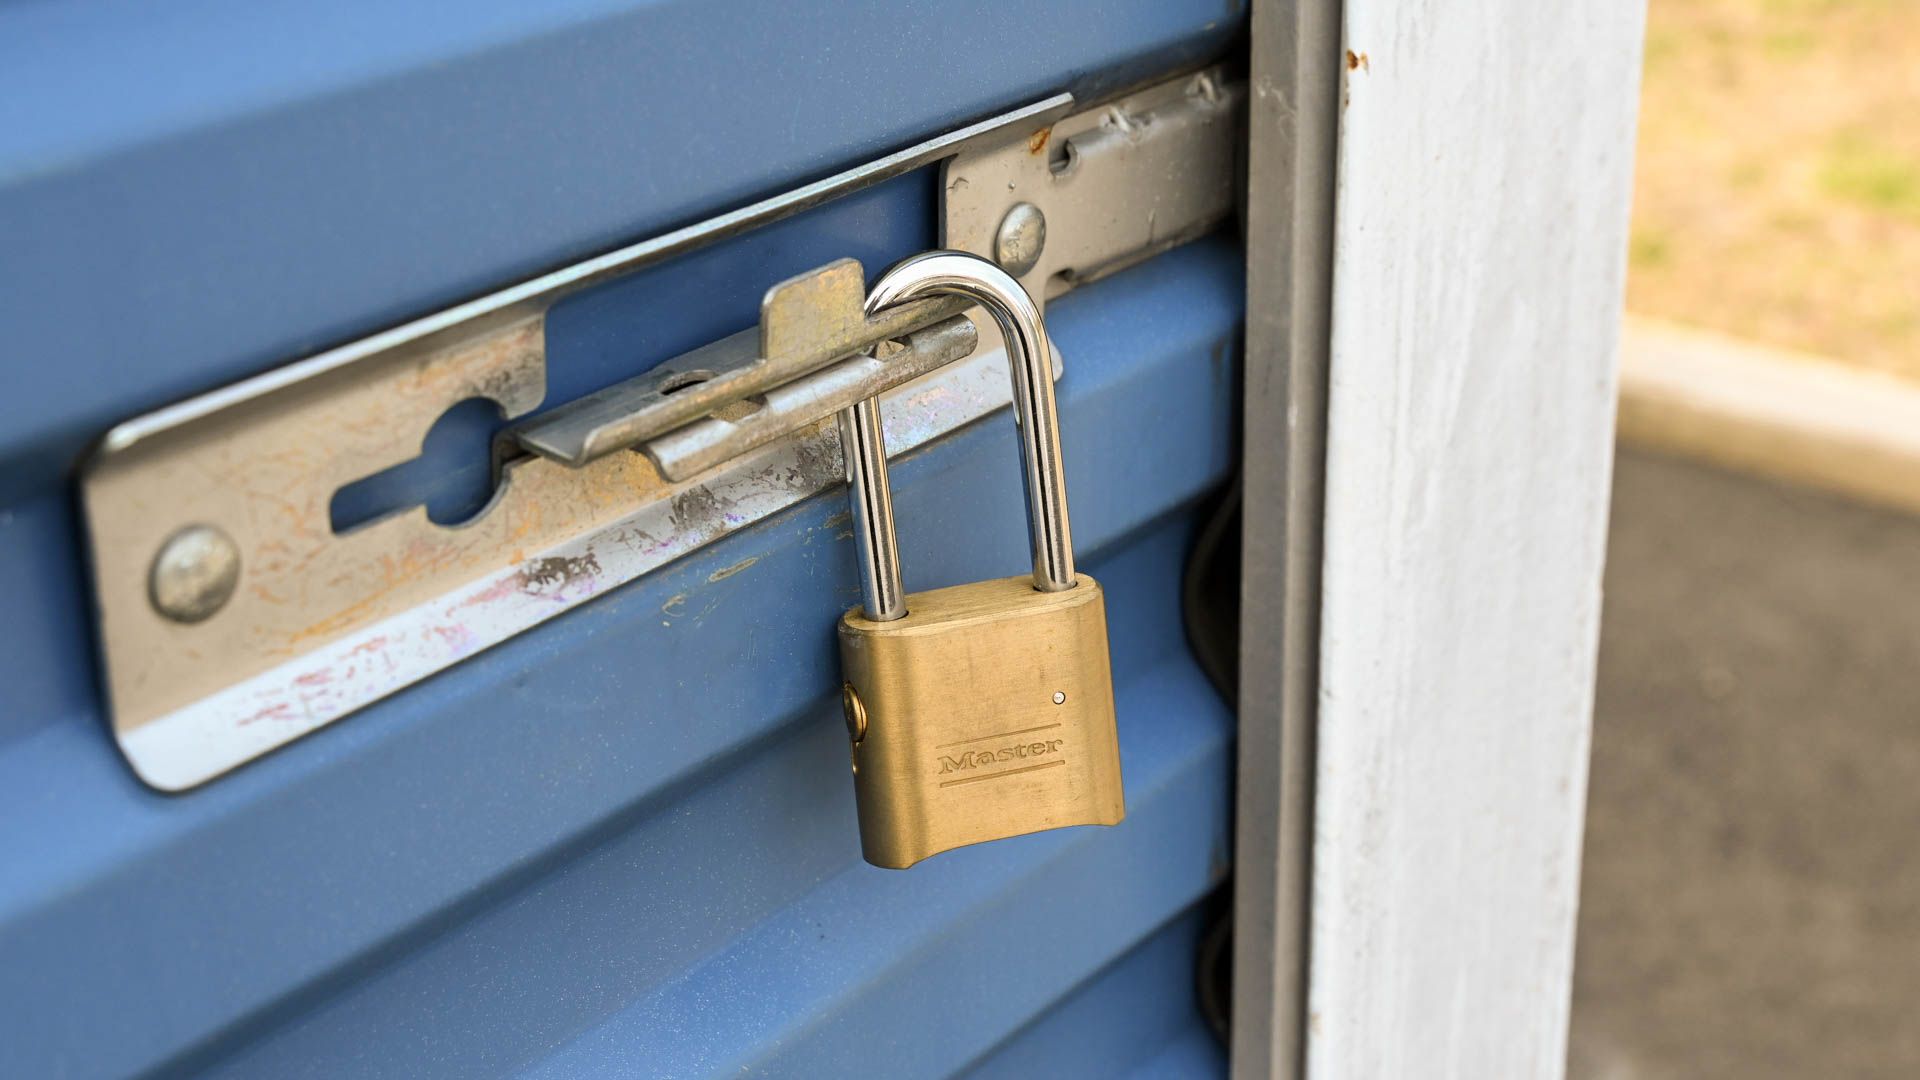 A master lock securing the latch on a storage unit